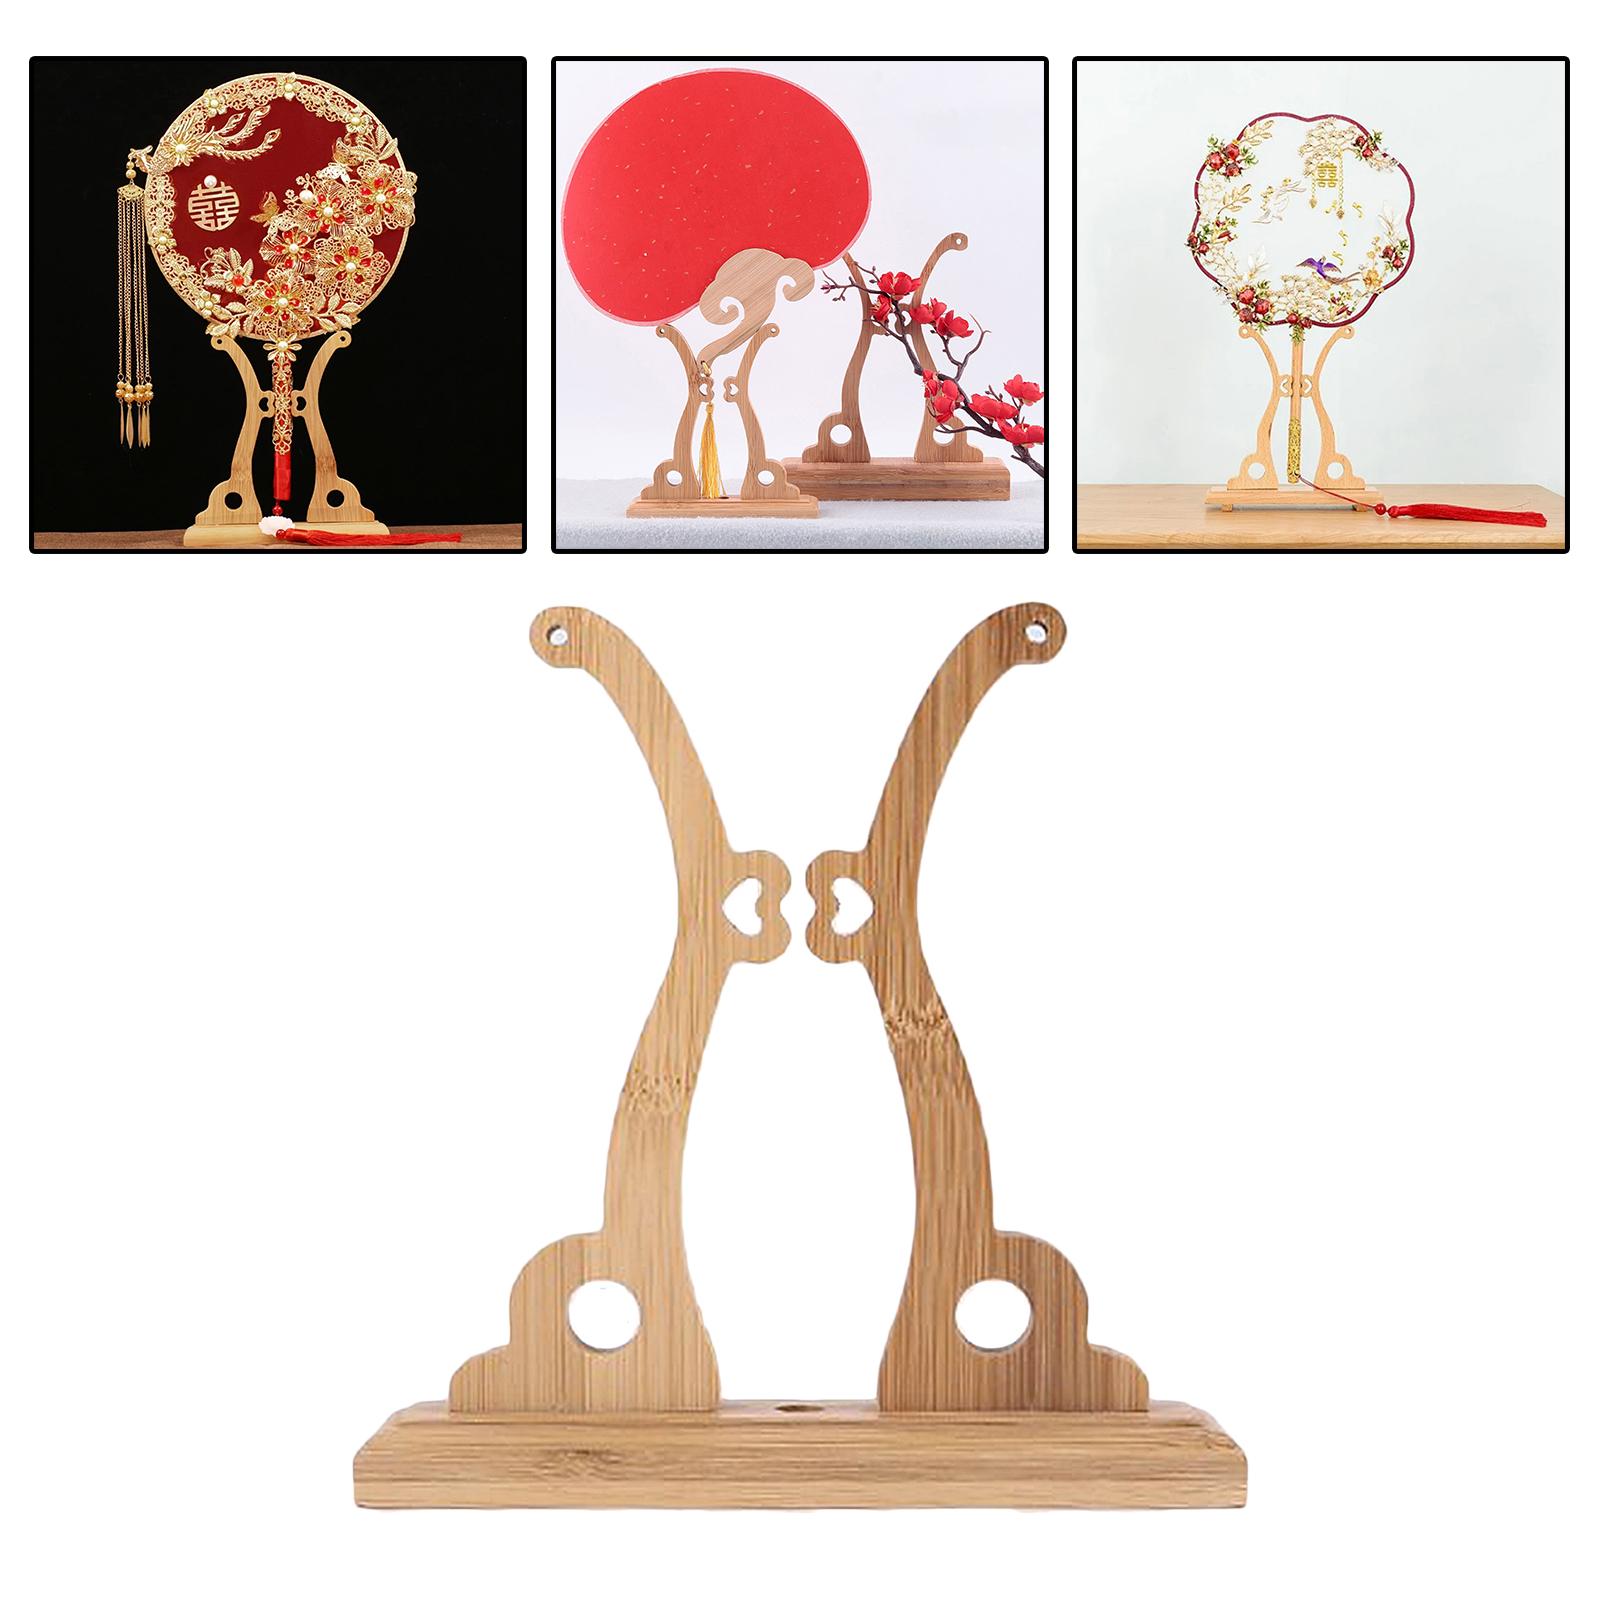 Bamboo Fans Palace Bracket Holder Stand for Chinese Style Round Circular Fan